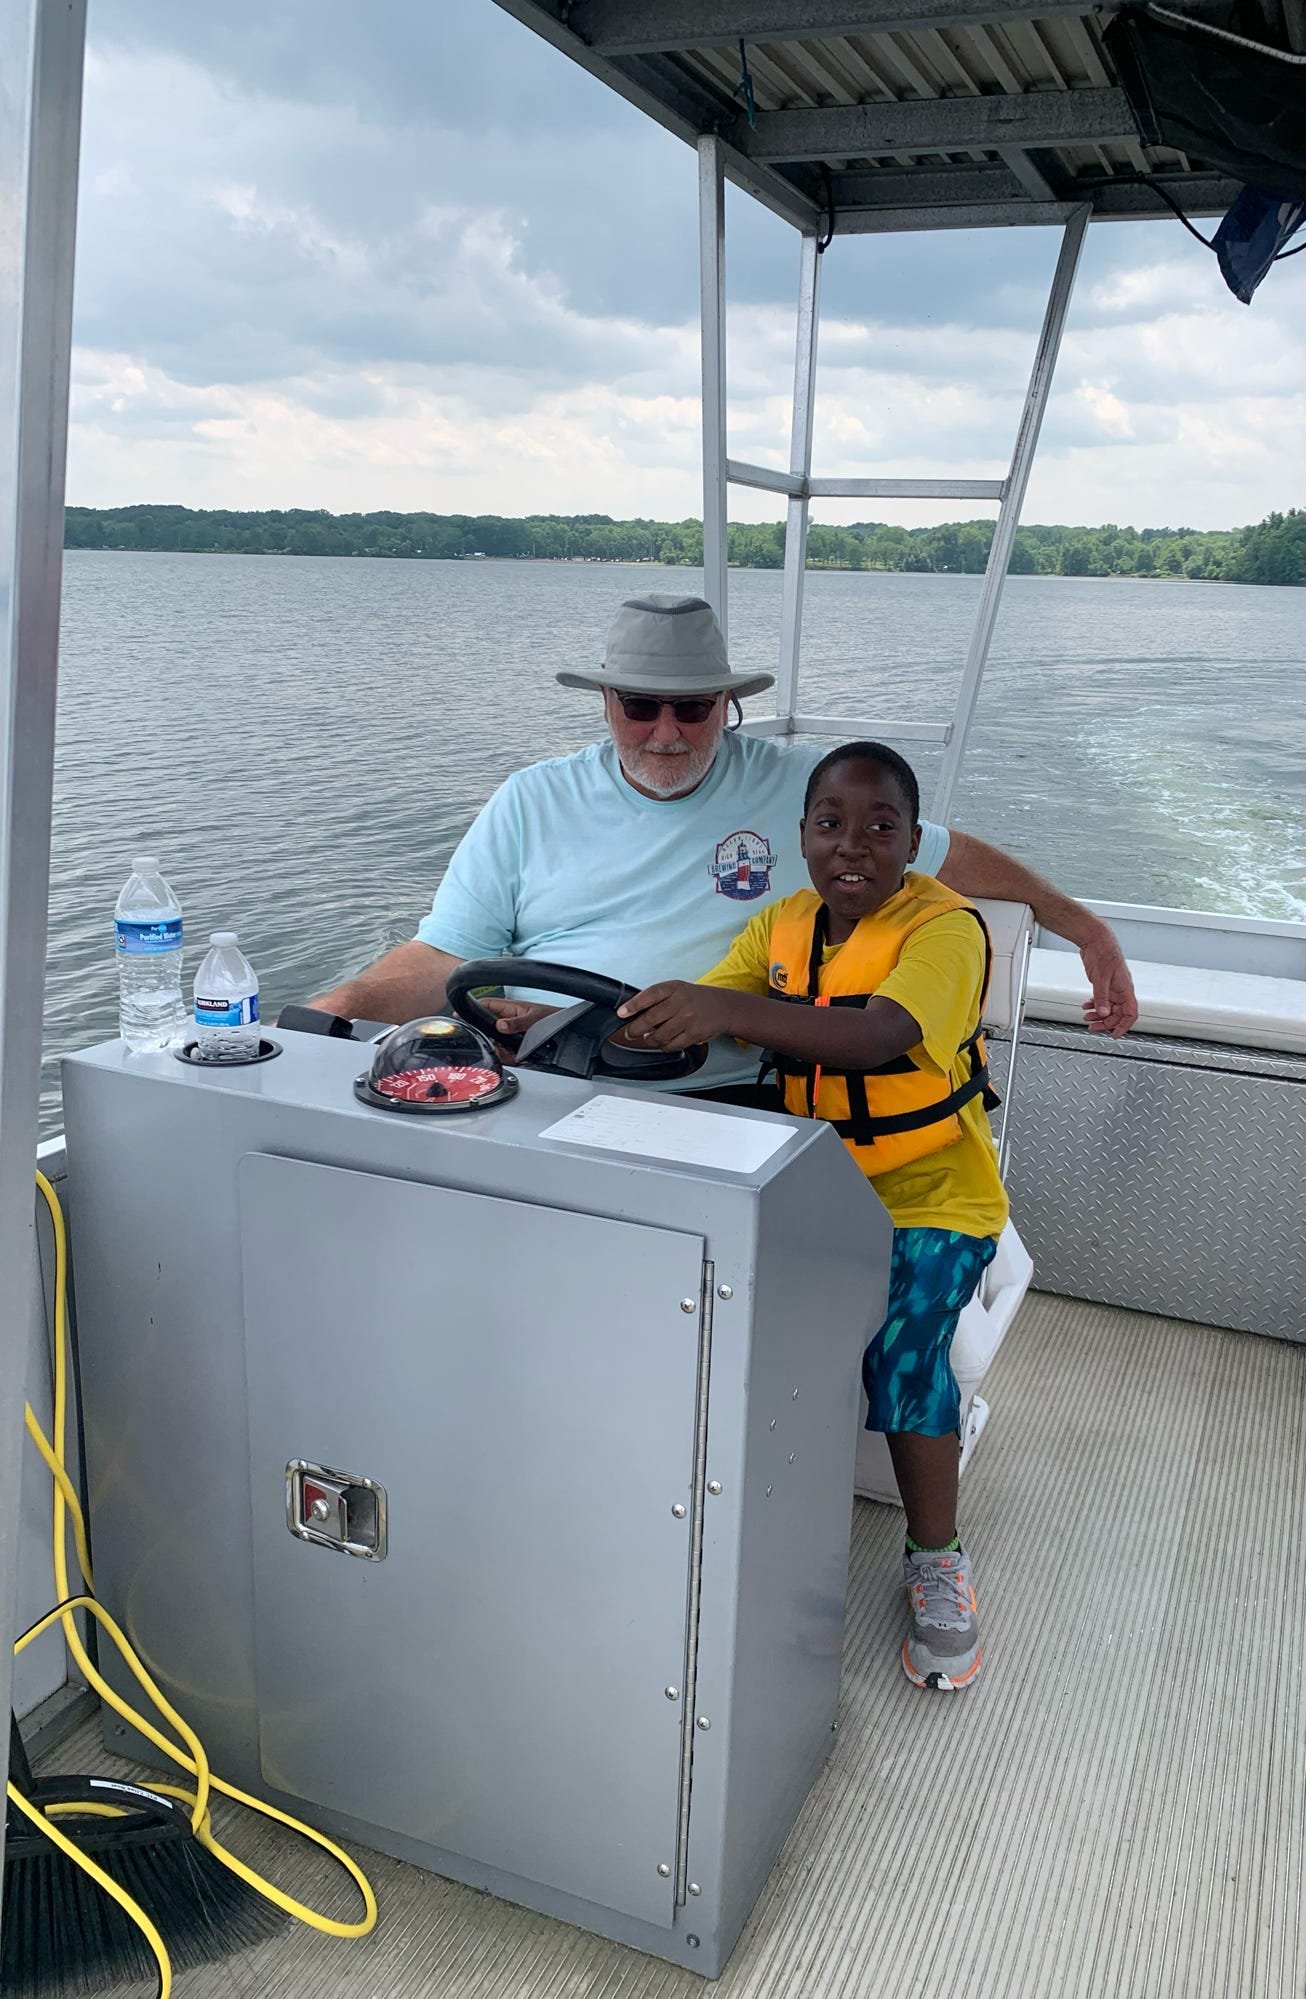  Envision athlete gets a chance to steer the boat at camp 